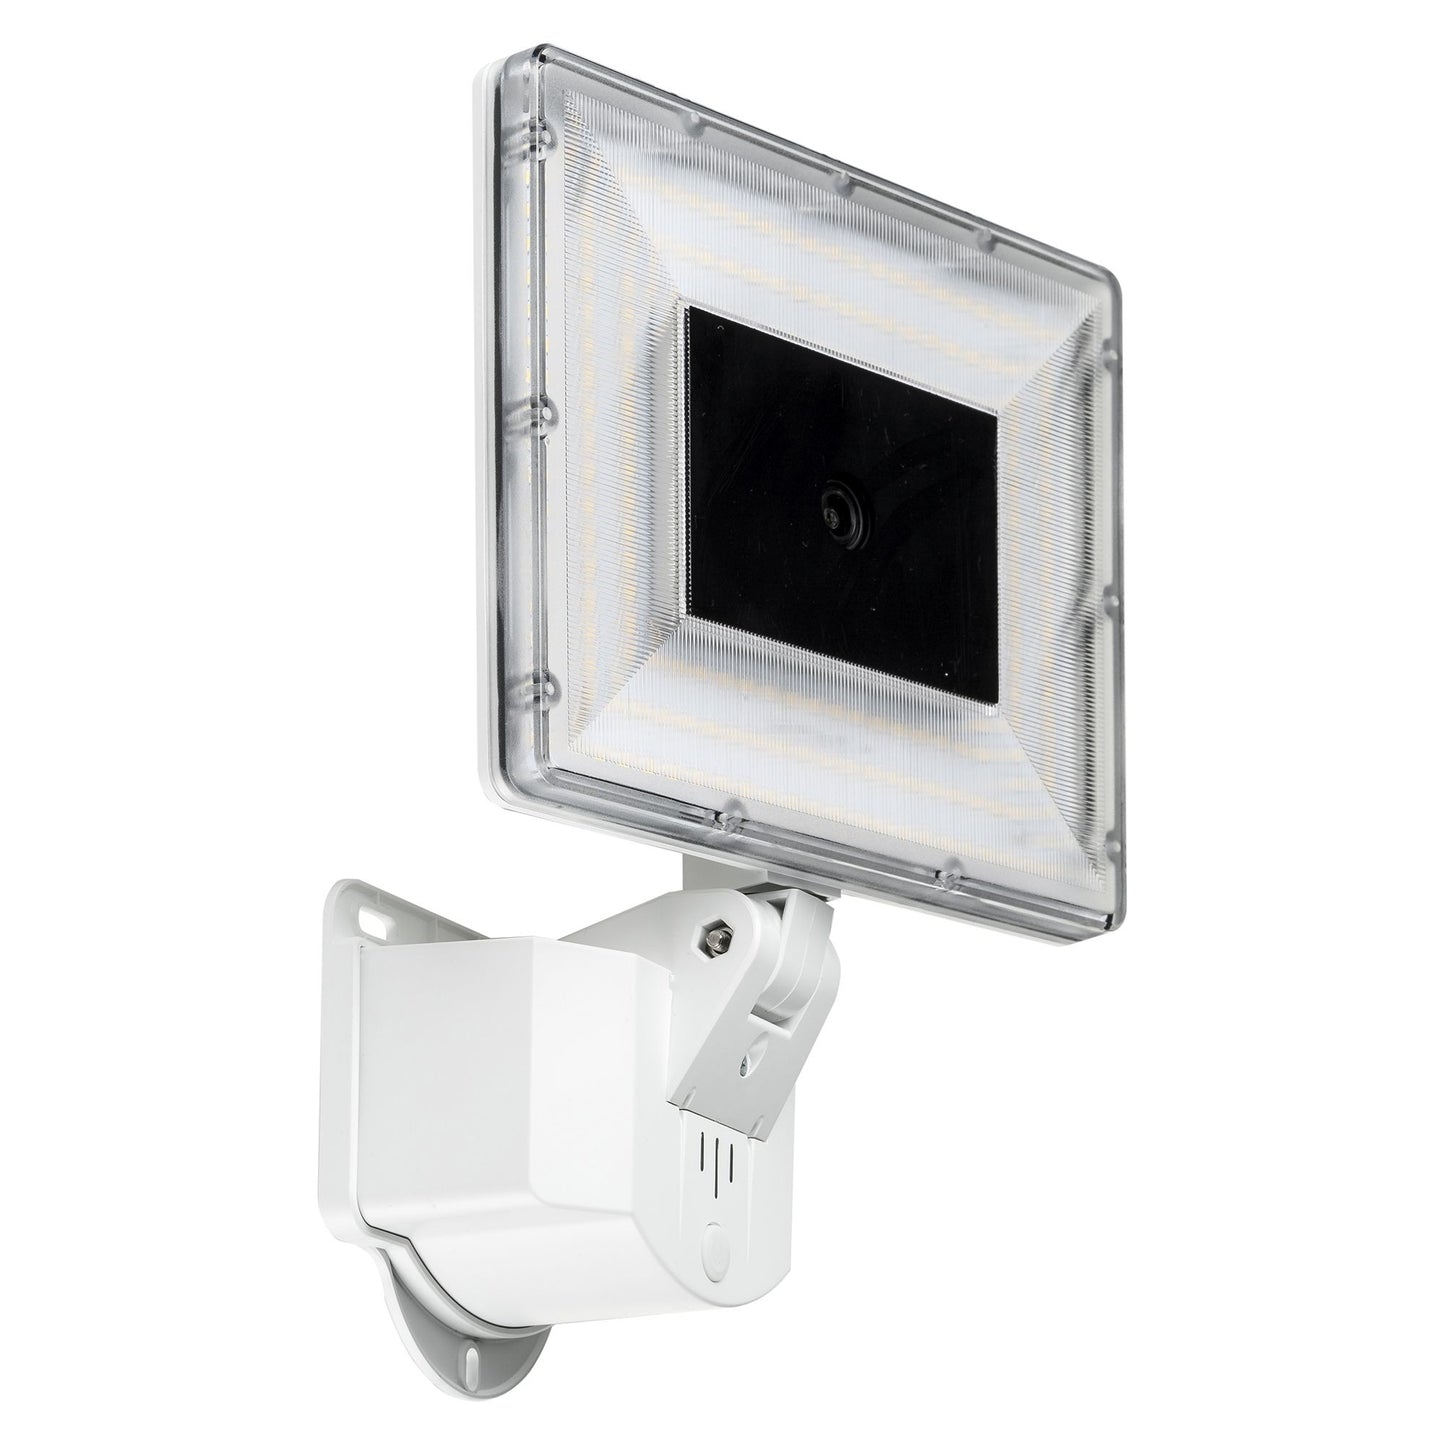 "FreD" Flood Light with IP Camera - White